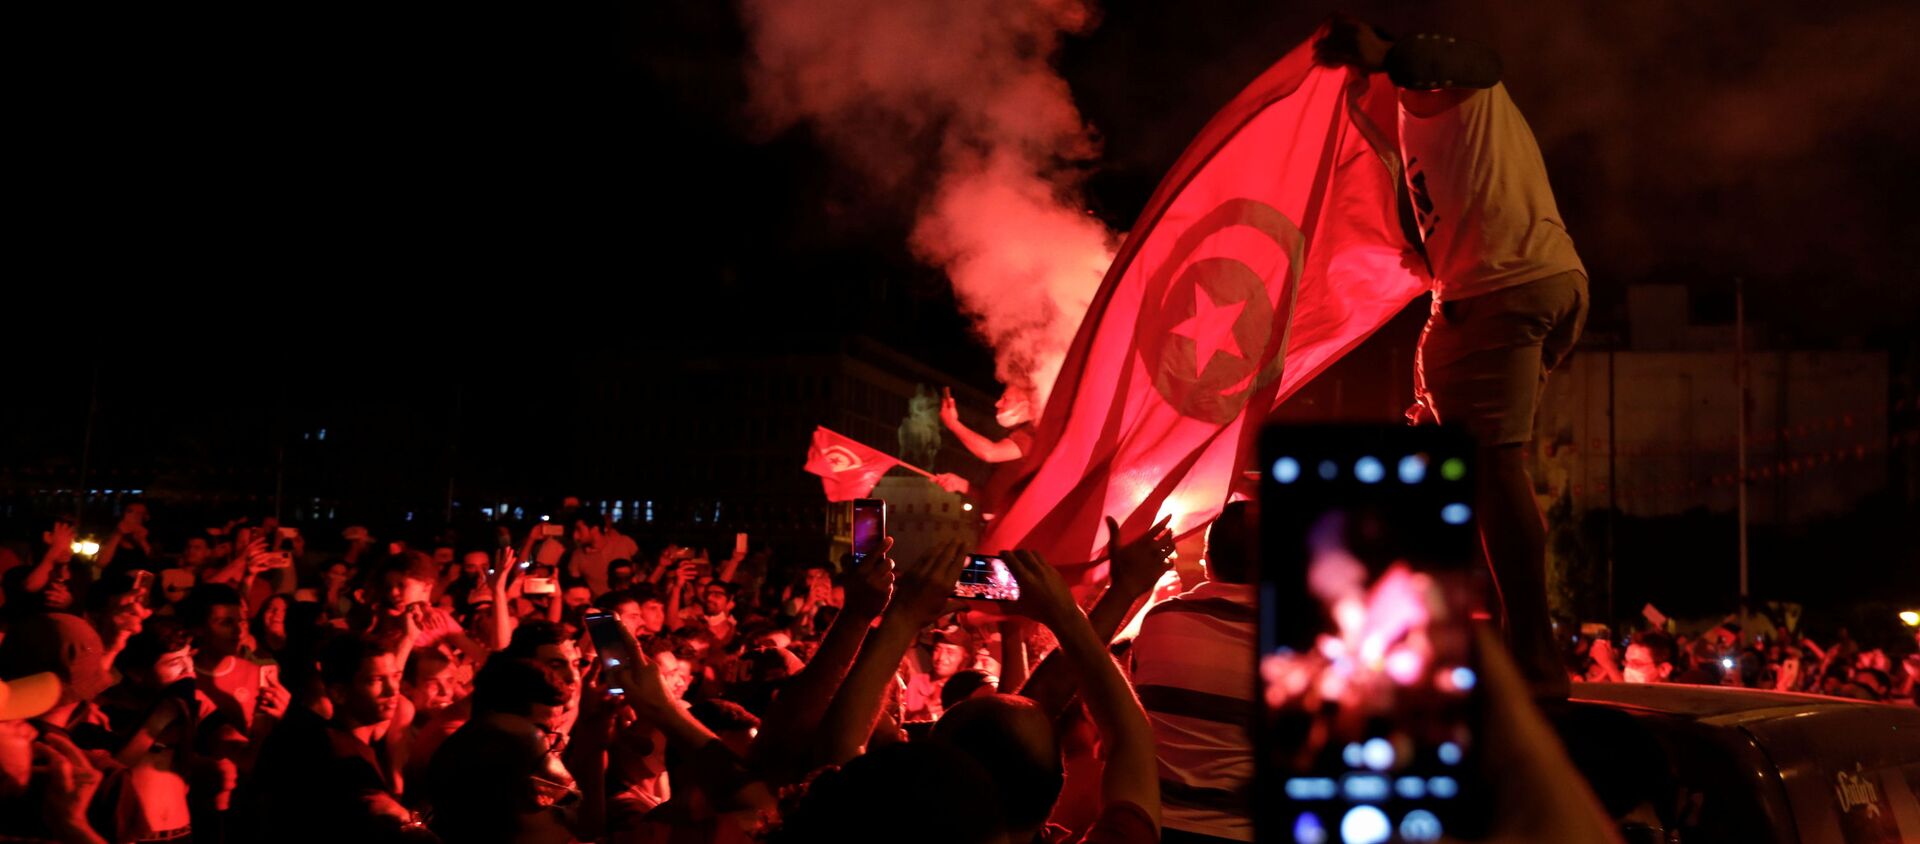 Supporters of Tunisia's President Kais Saied gather on the streets as they celebrate after he dismissed the government and froze parliament, in Tunis, Tunisia July 25, 2021. - Sputnik International, 1920, 25.07.2021